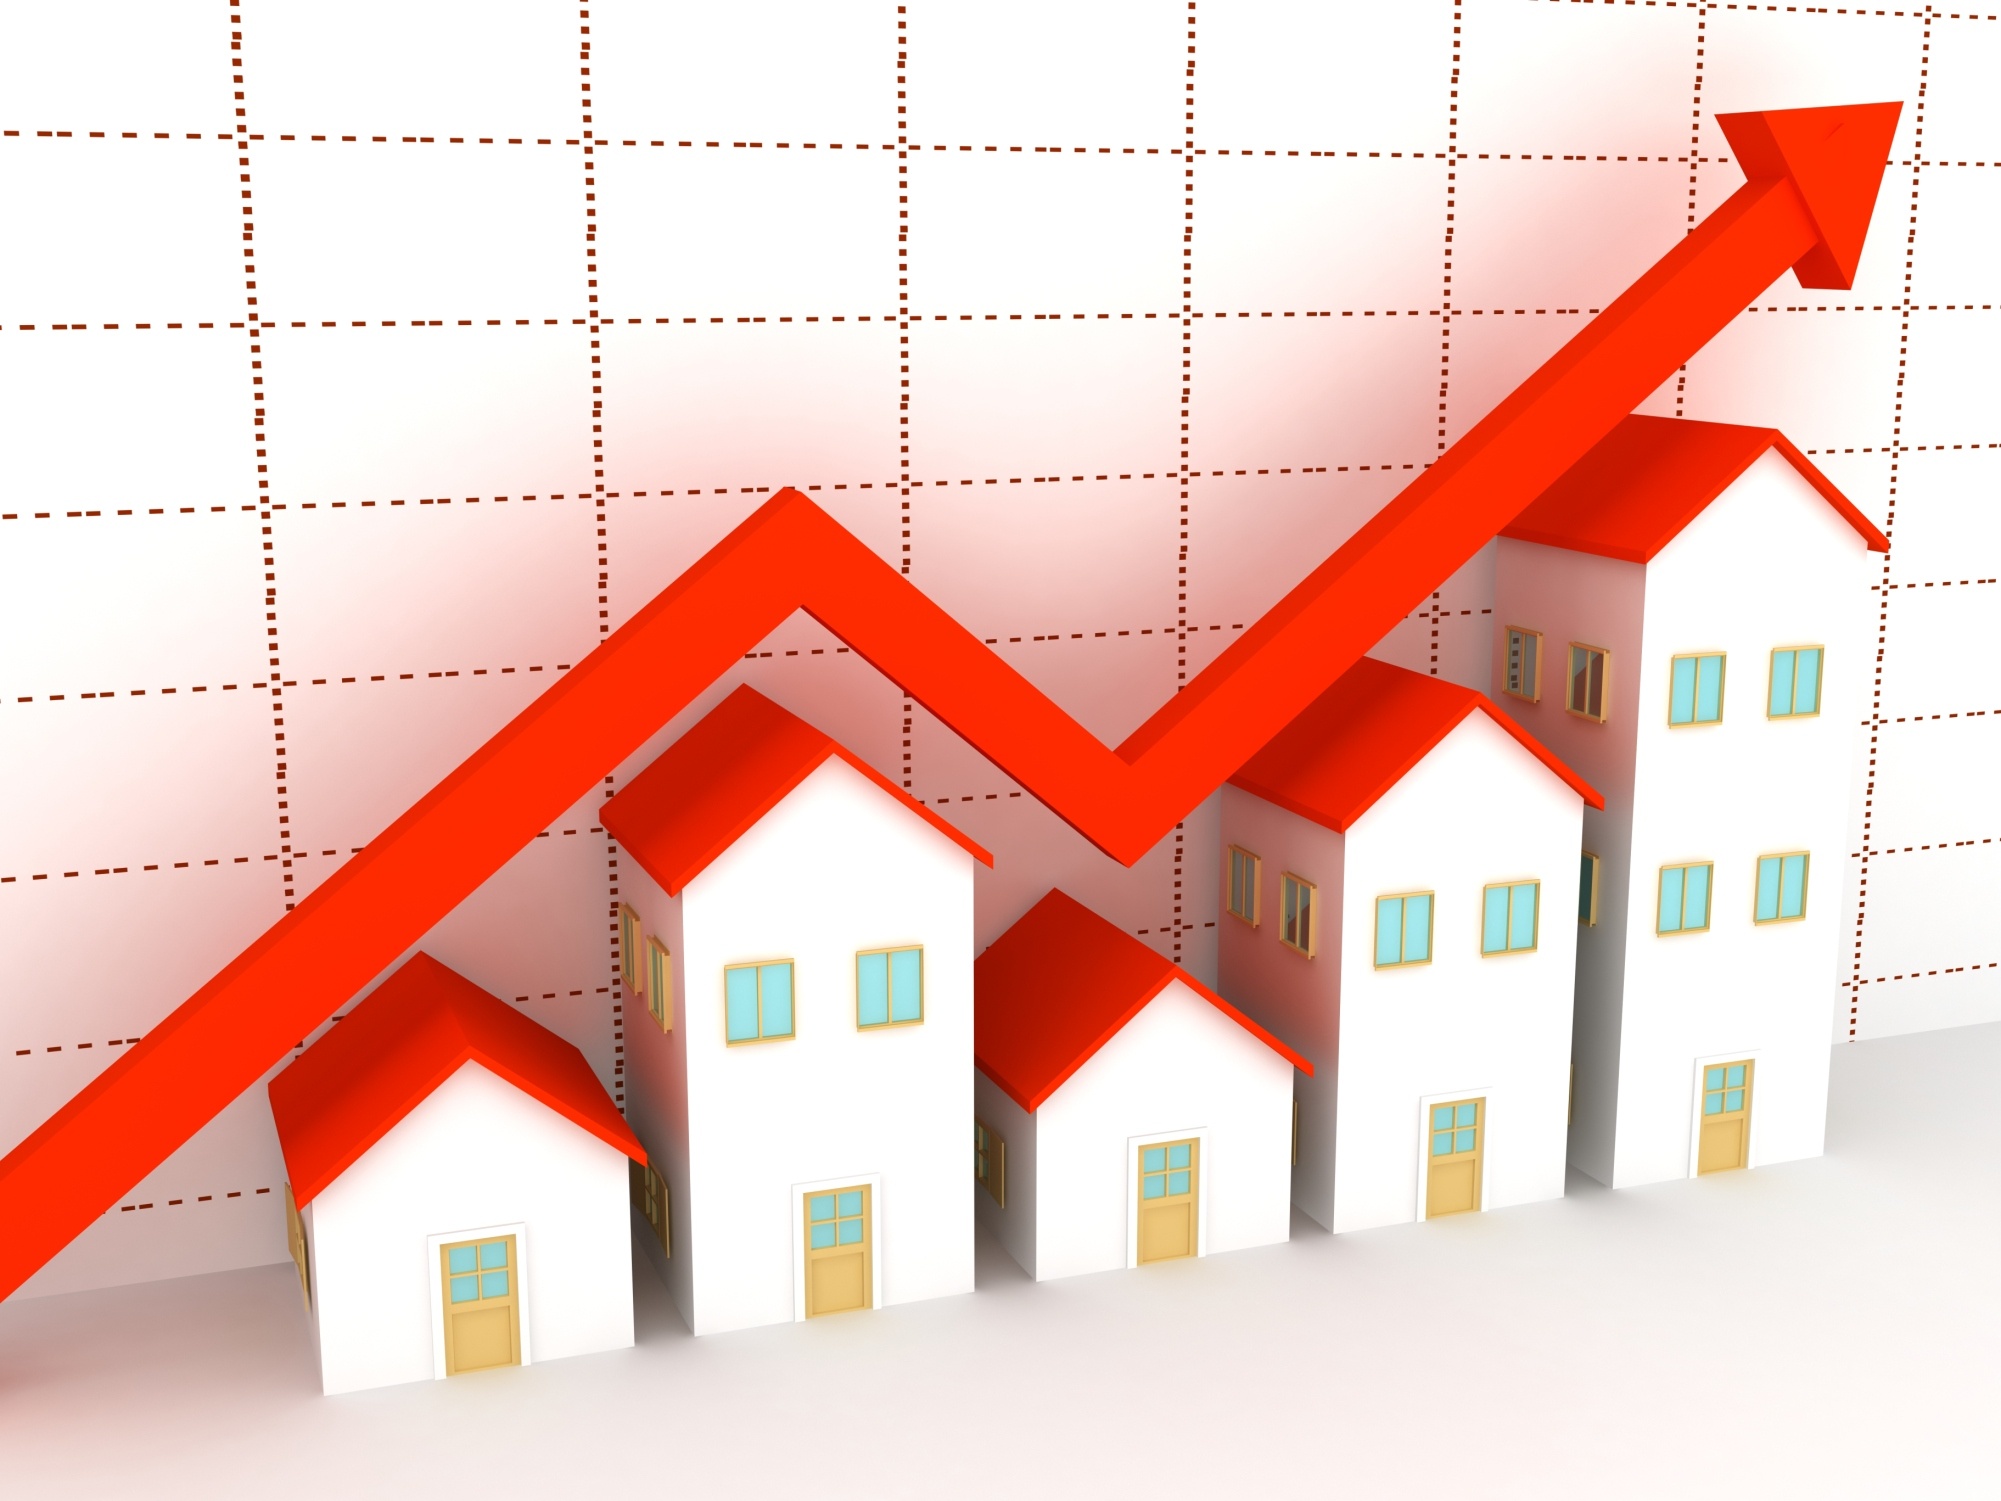 How to Increase Commercial and Residential Property Value